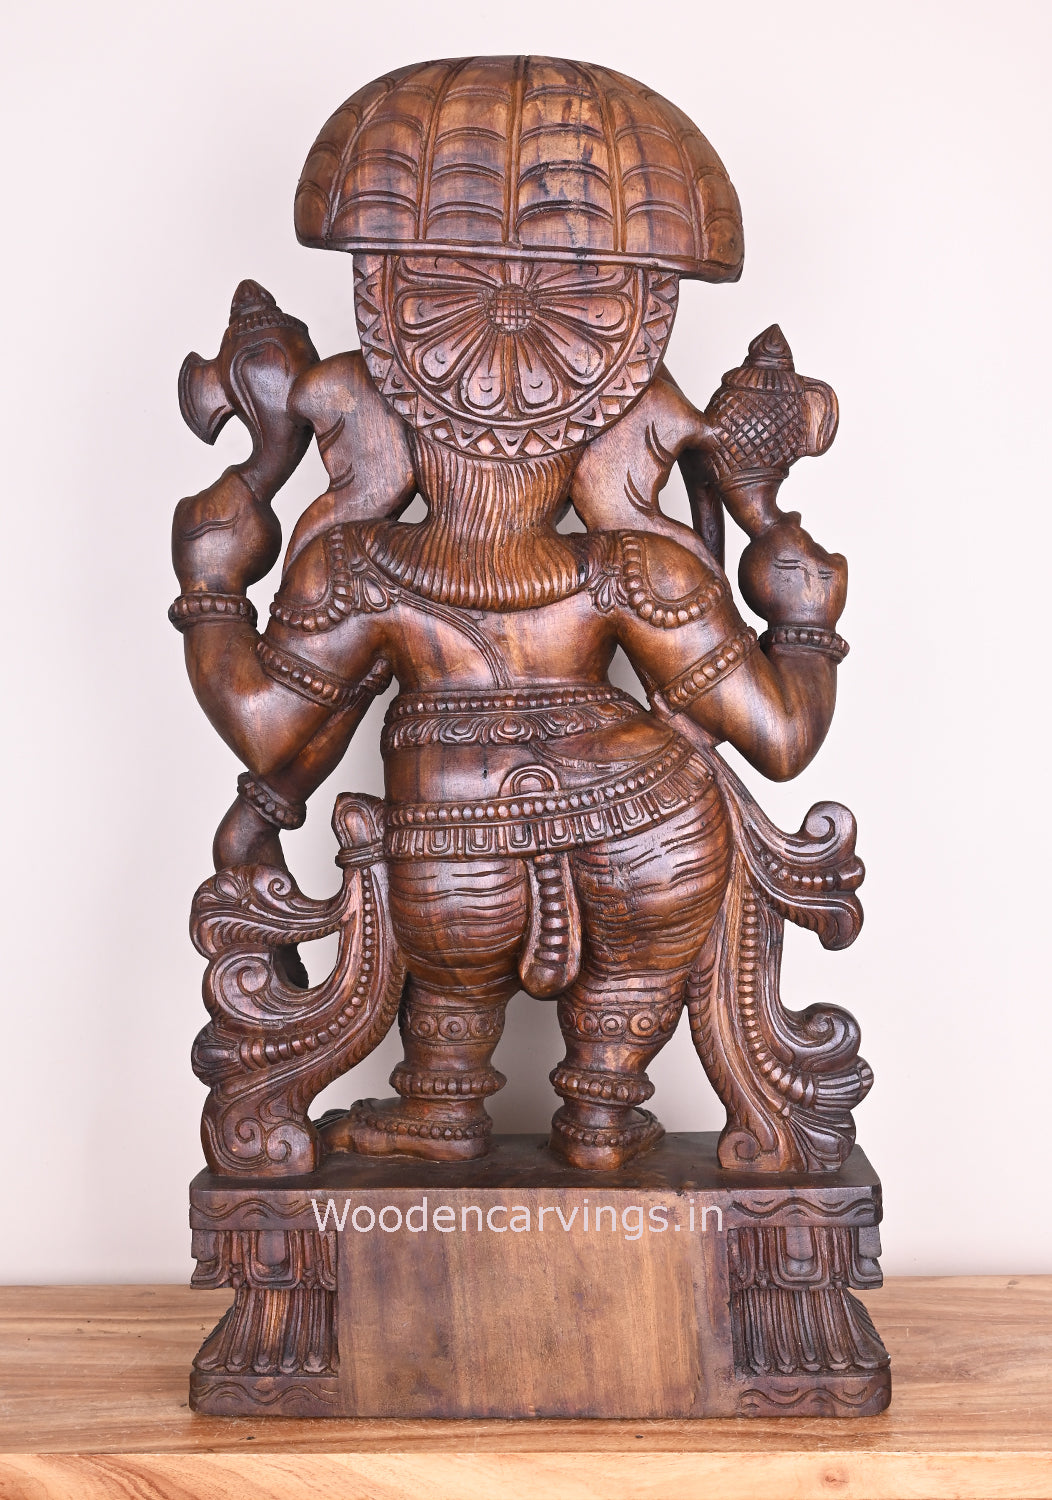 Remover of Obstacles Lord Ganapathi Holding Umbrella Standing on Base Wooden Handmade Sculpture 36"